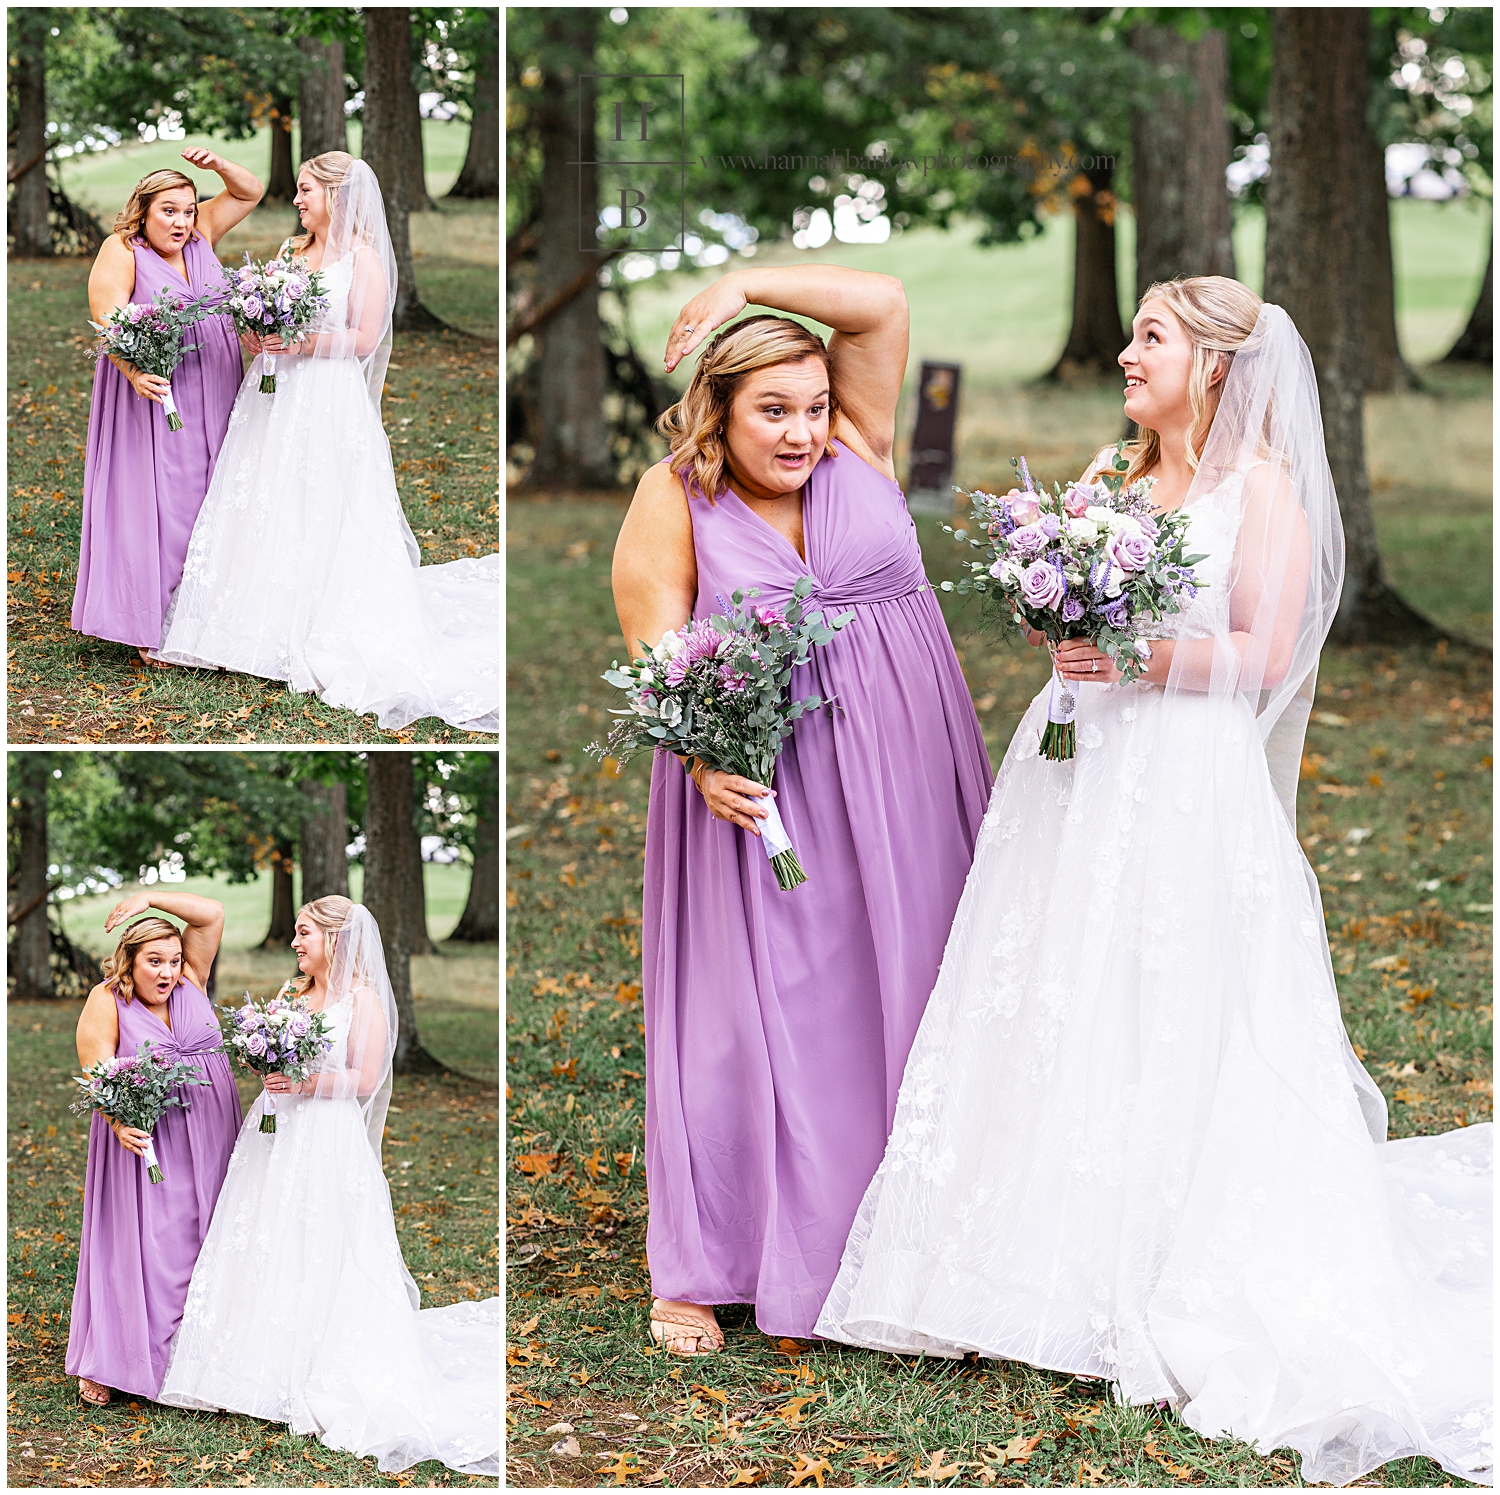 Bridesmaid in purple dress holds hand over head so acorn doesn't hit her.